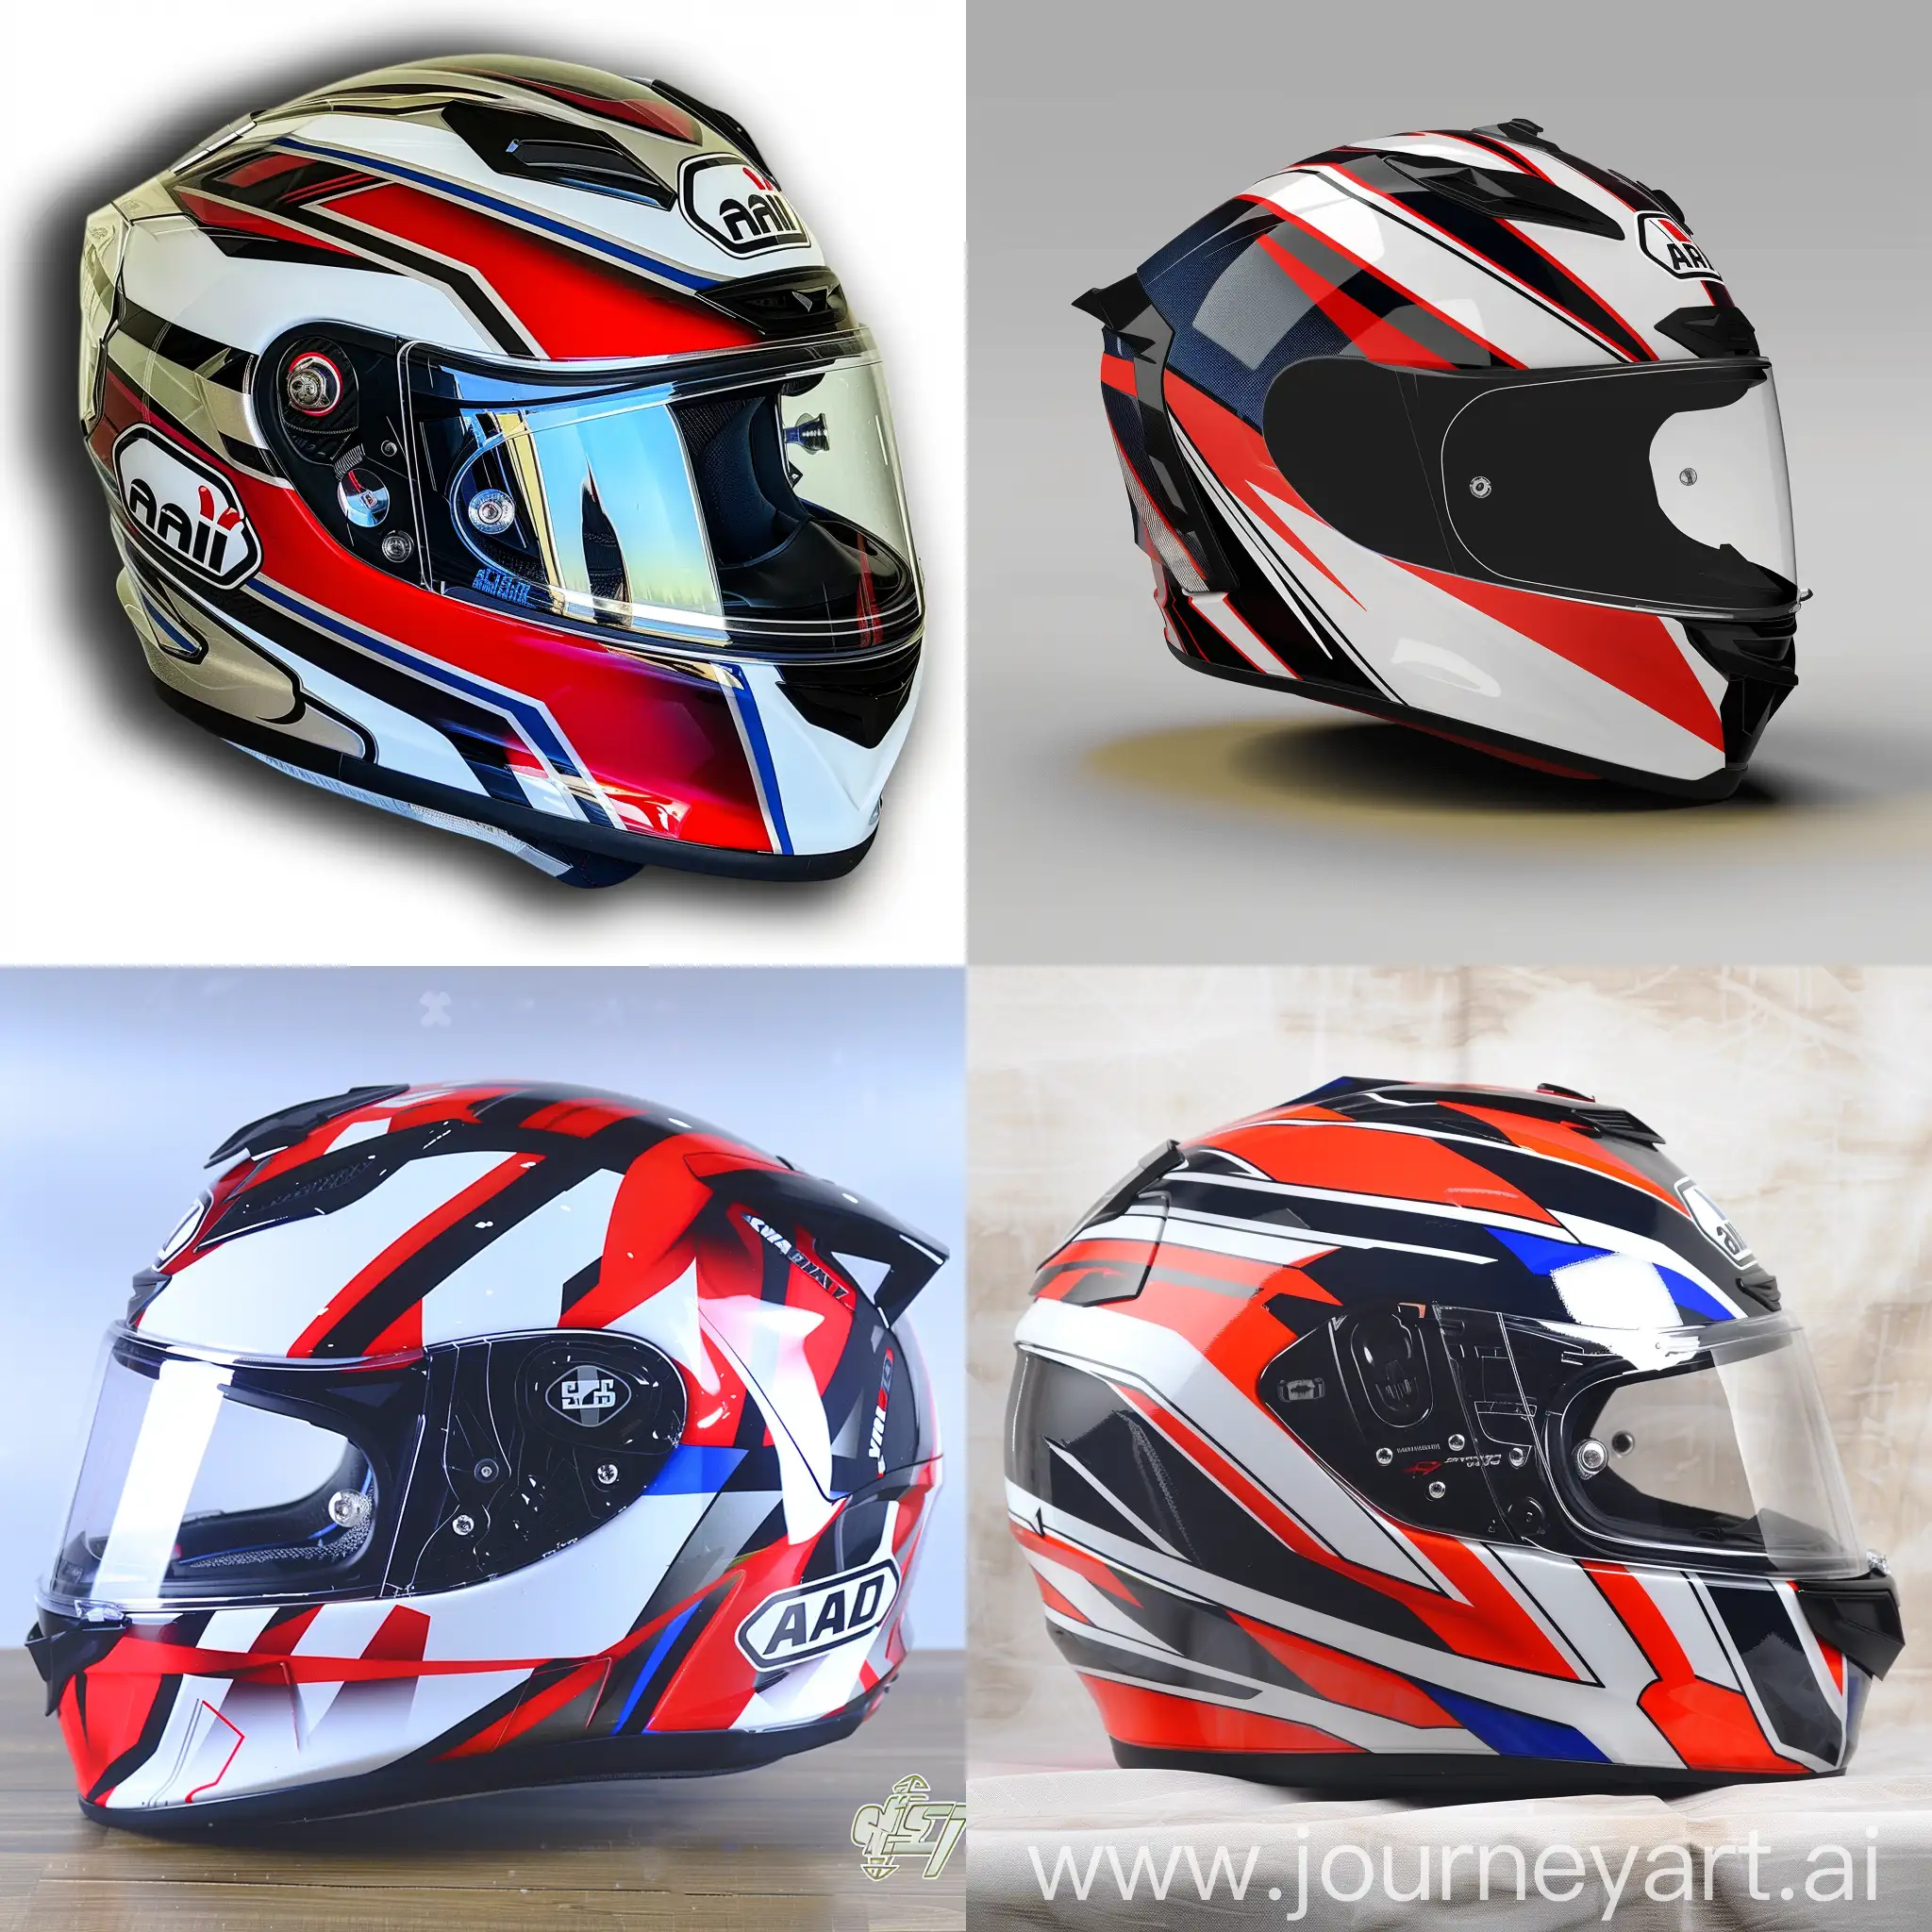 I need a brand-new helmet design pattern to be printed on a helmet. The helmet model is a full-face ARAI helmet for motorcycles. The design should be simple with bold lines, and the color scheme should include red, white, black, and blue. I need design patterns for the front, left side, right side, back, and top of the helmet.